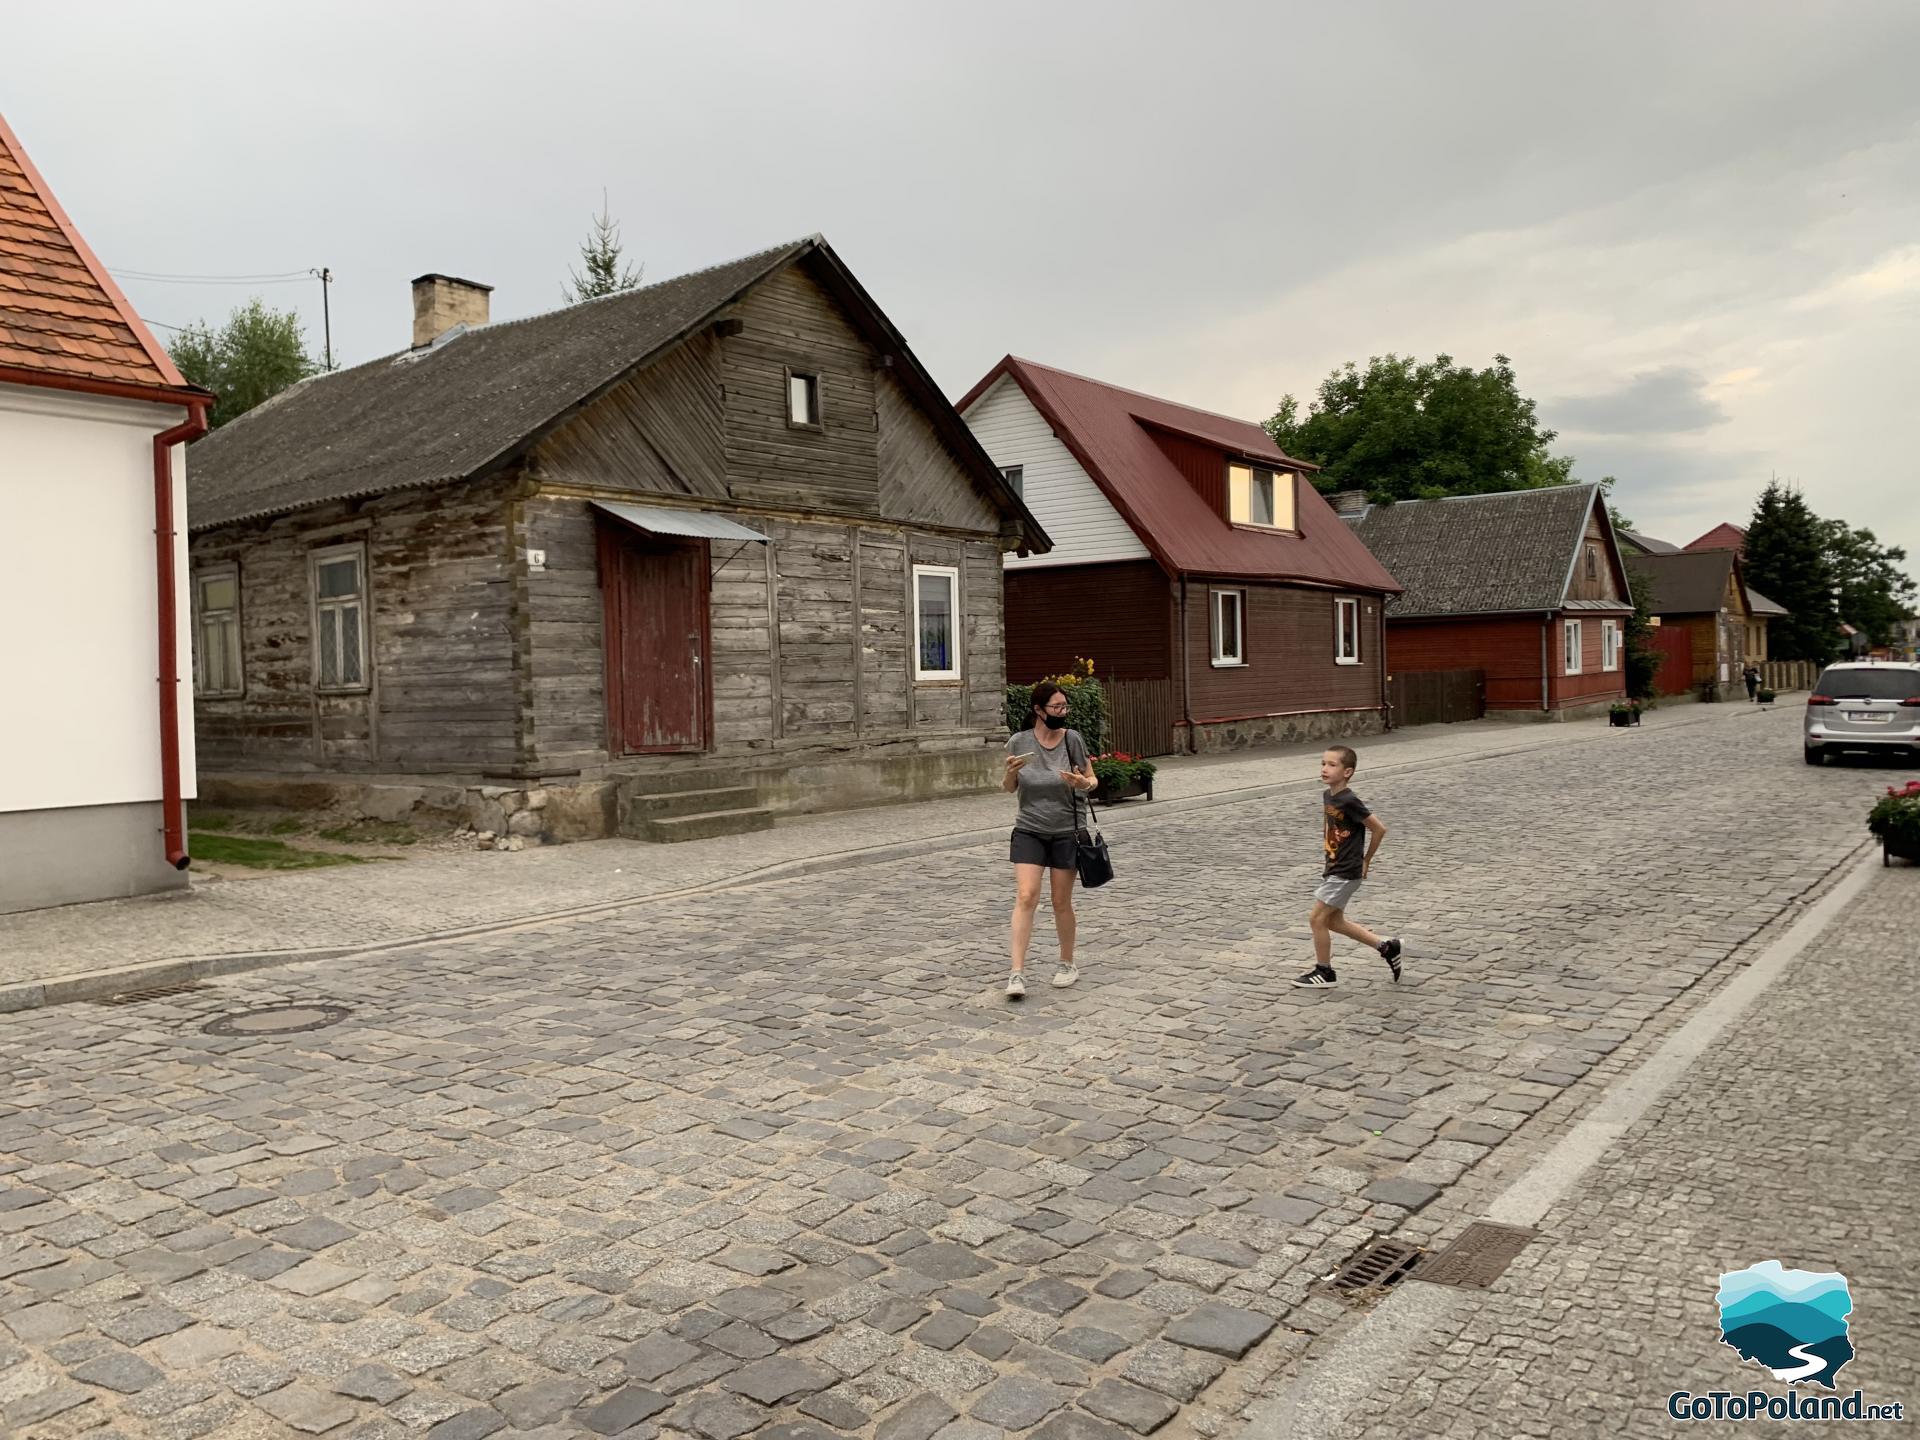 some old huts in the street, there is a woman and a boy on the cobbled street